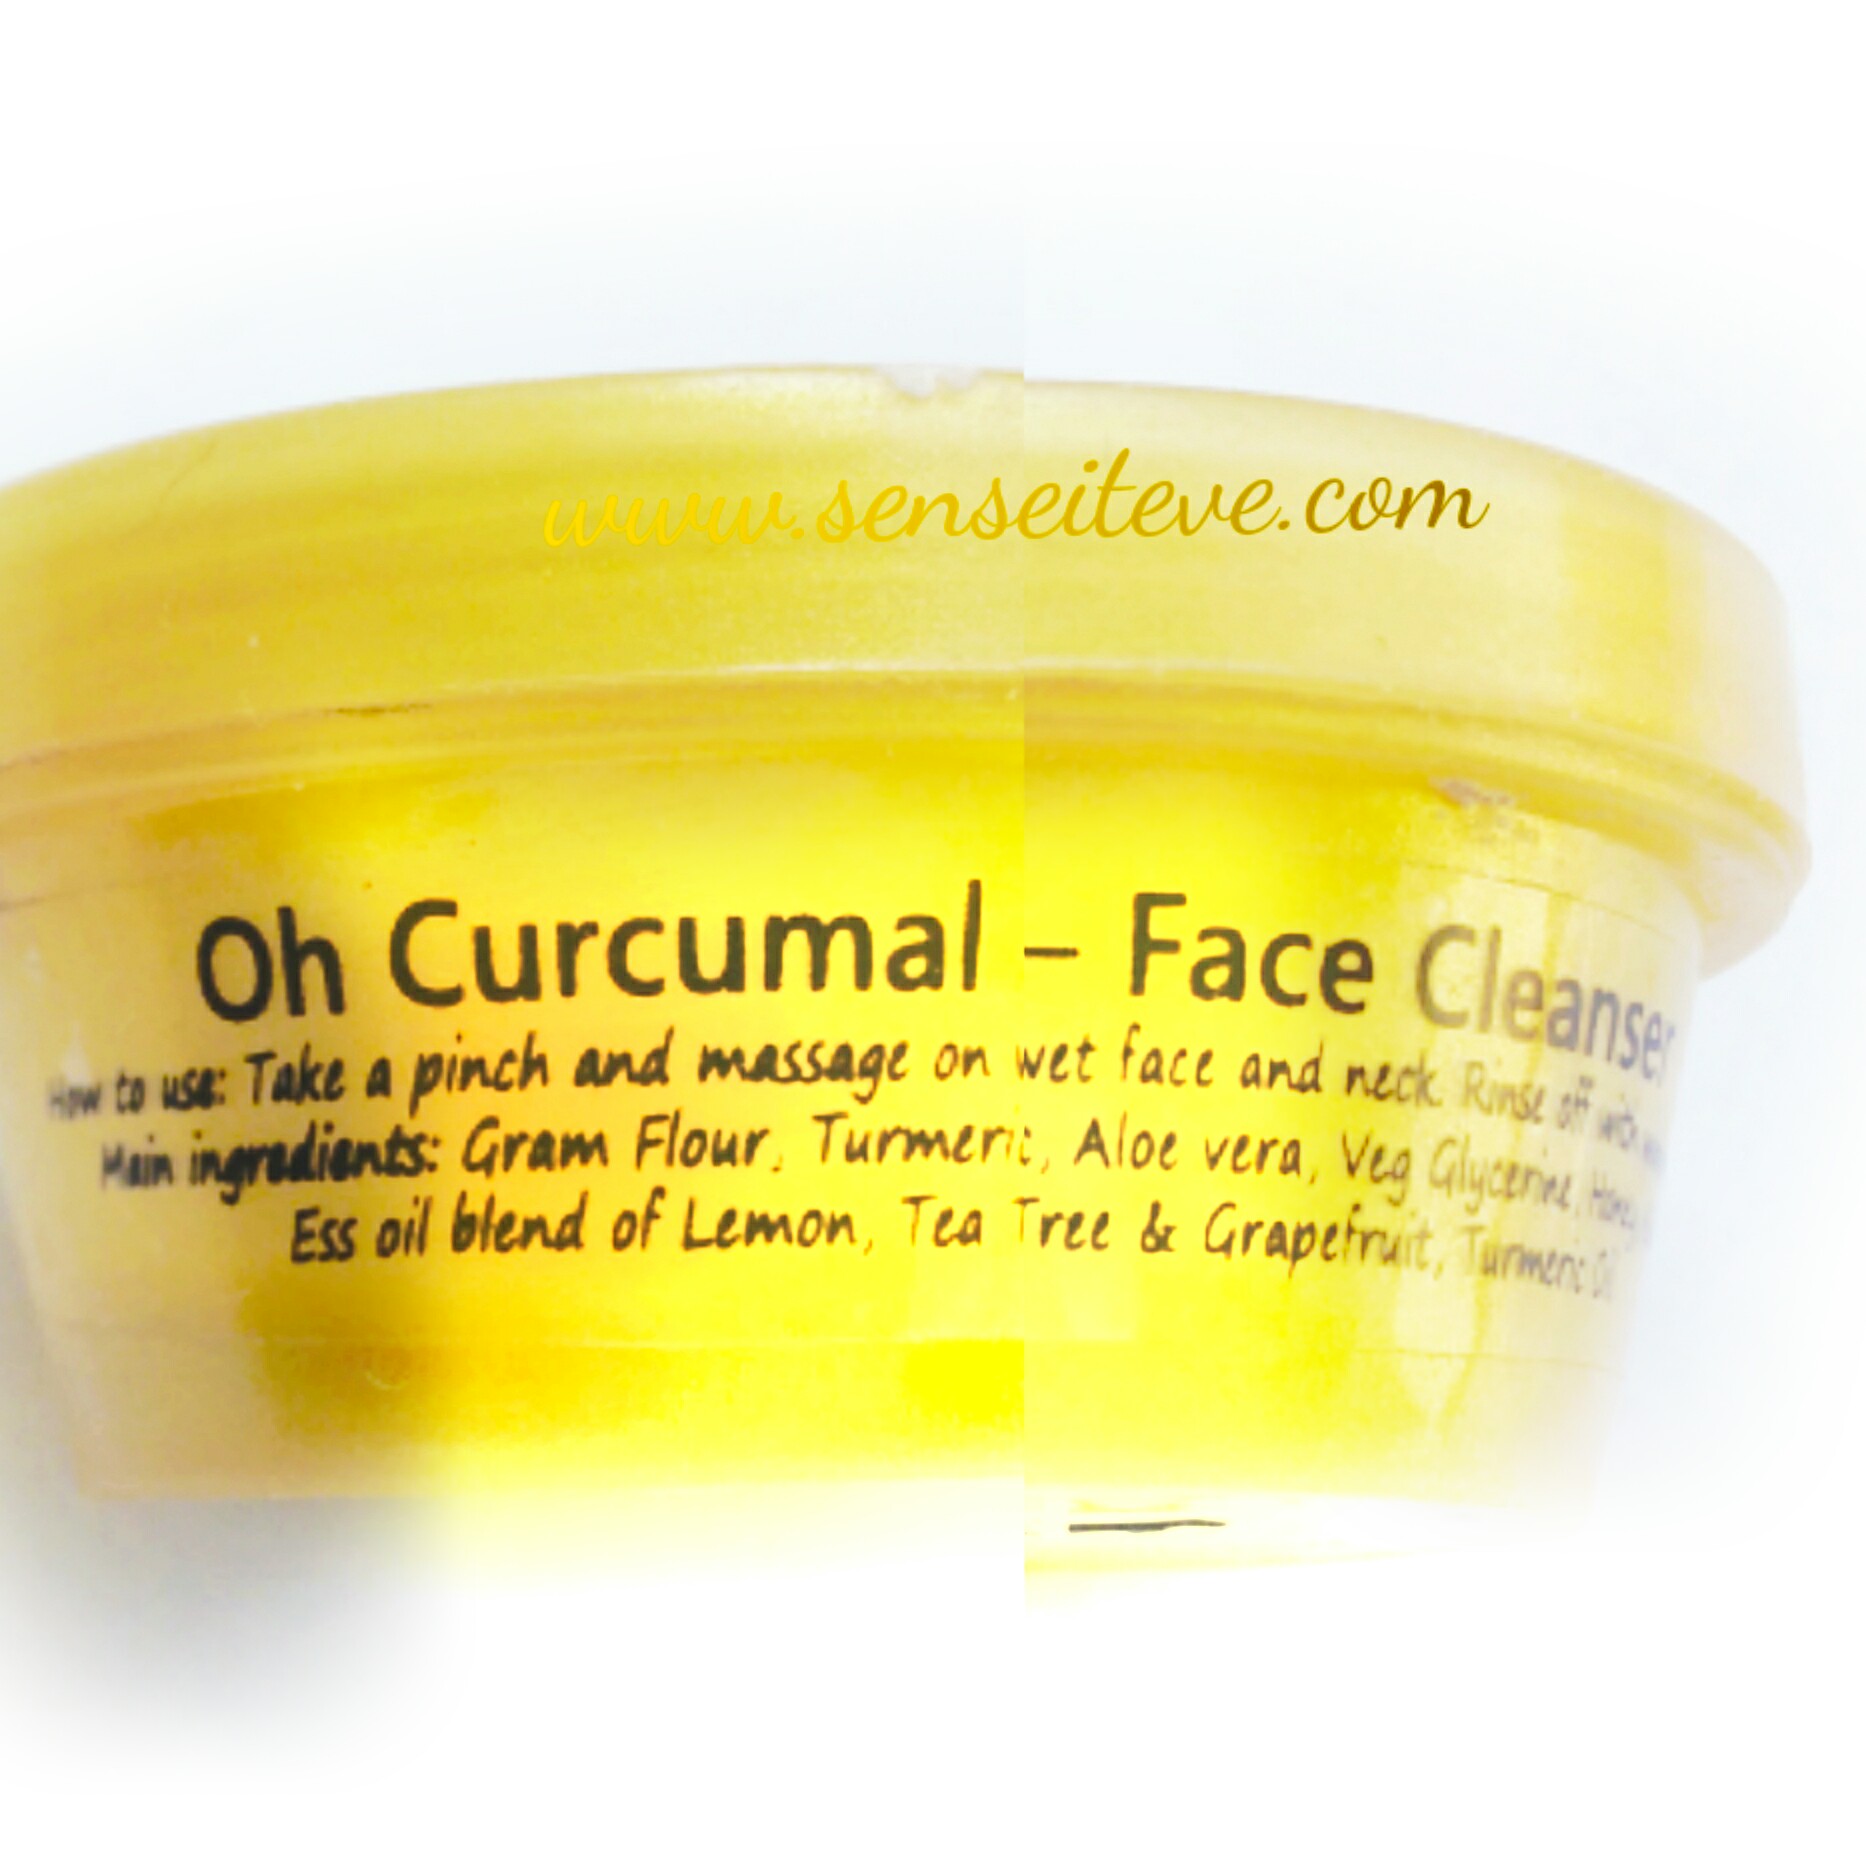 SaND Oh Curcumal Face Cleanser Ingredients and how to use